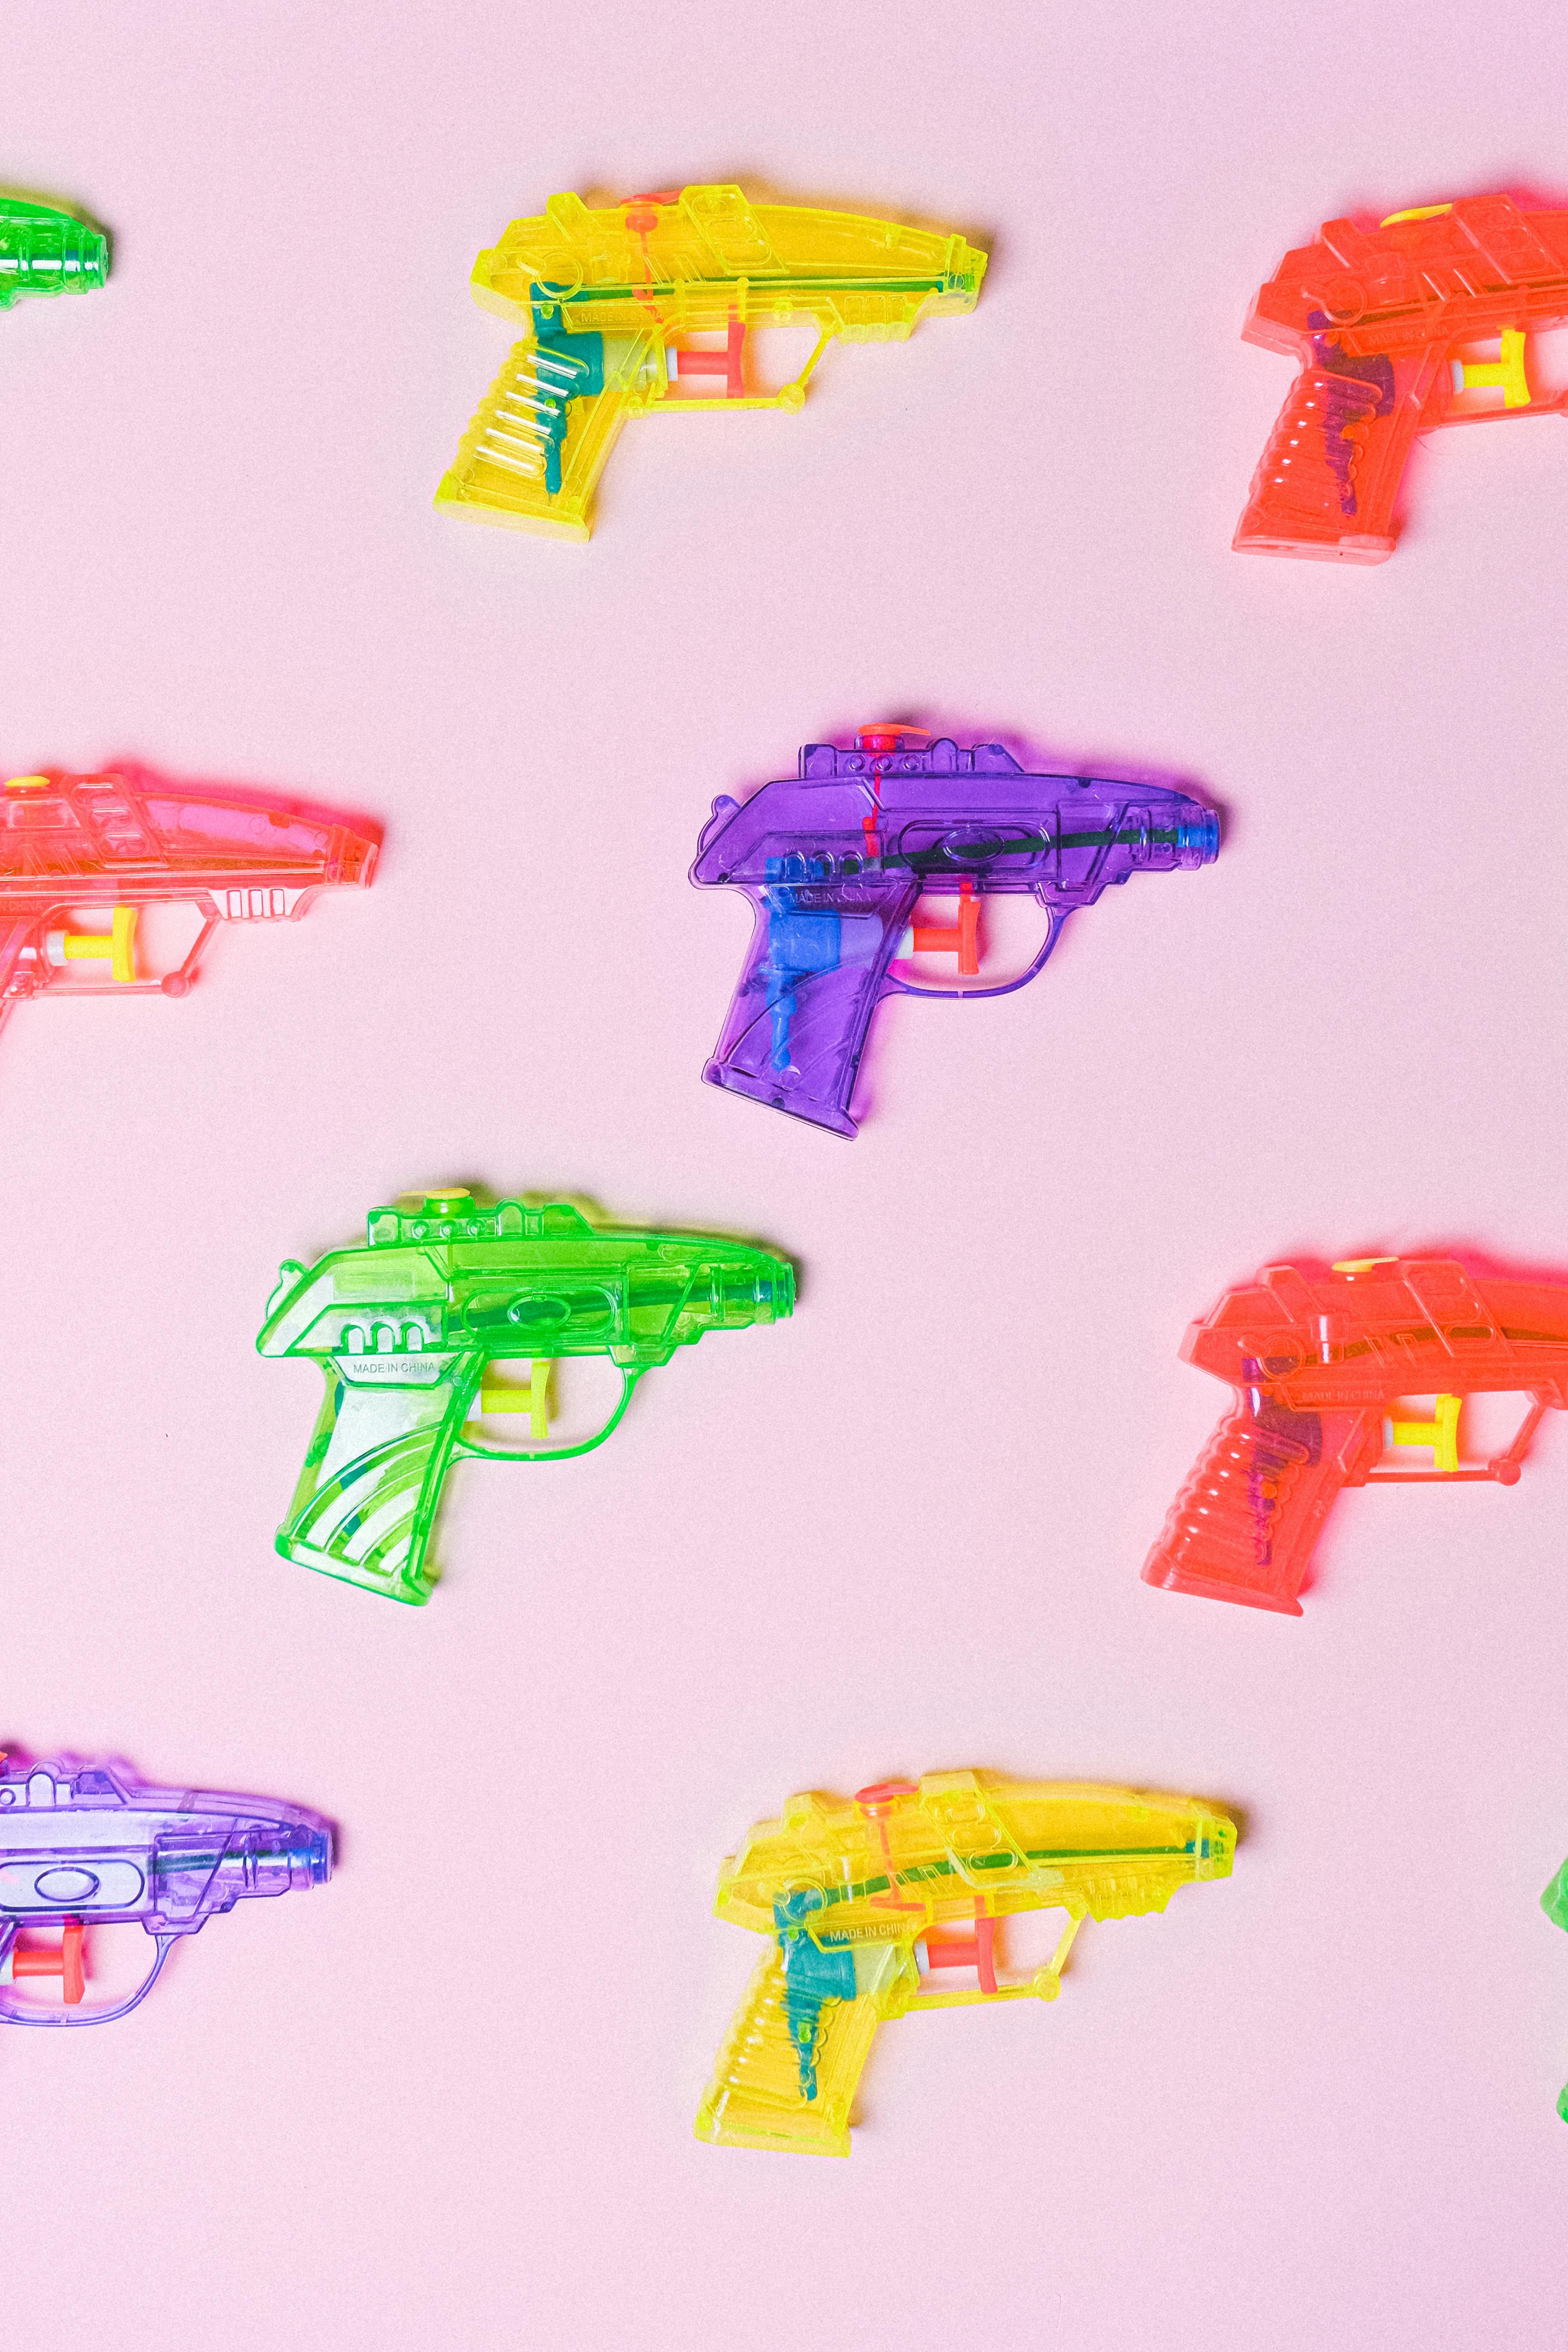 assortment of colorful plastic guns for pretend fight